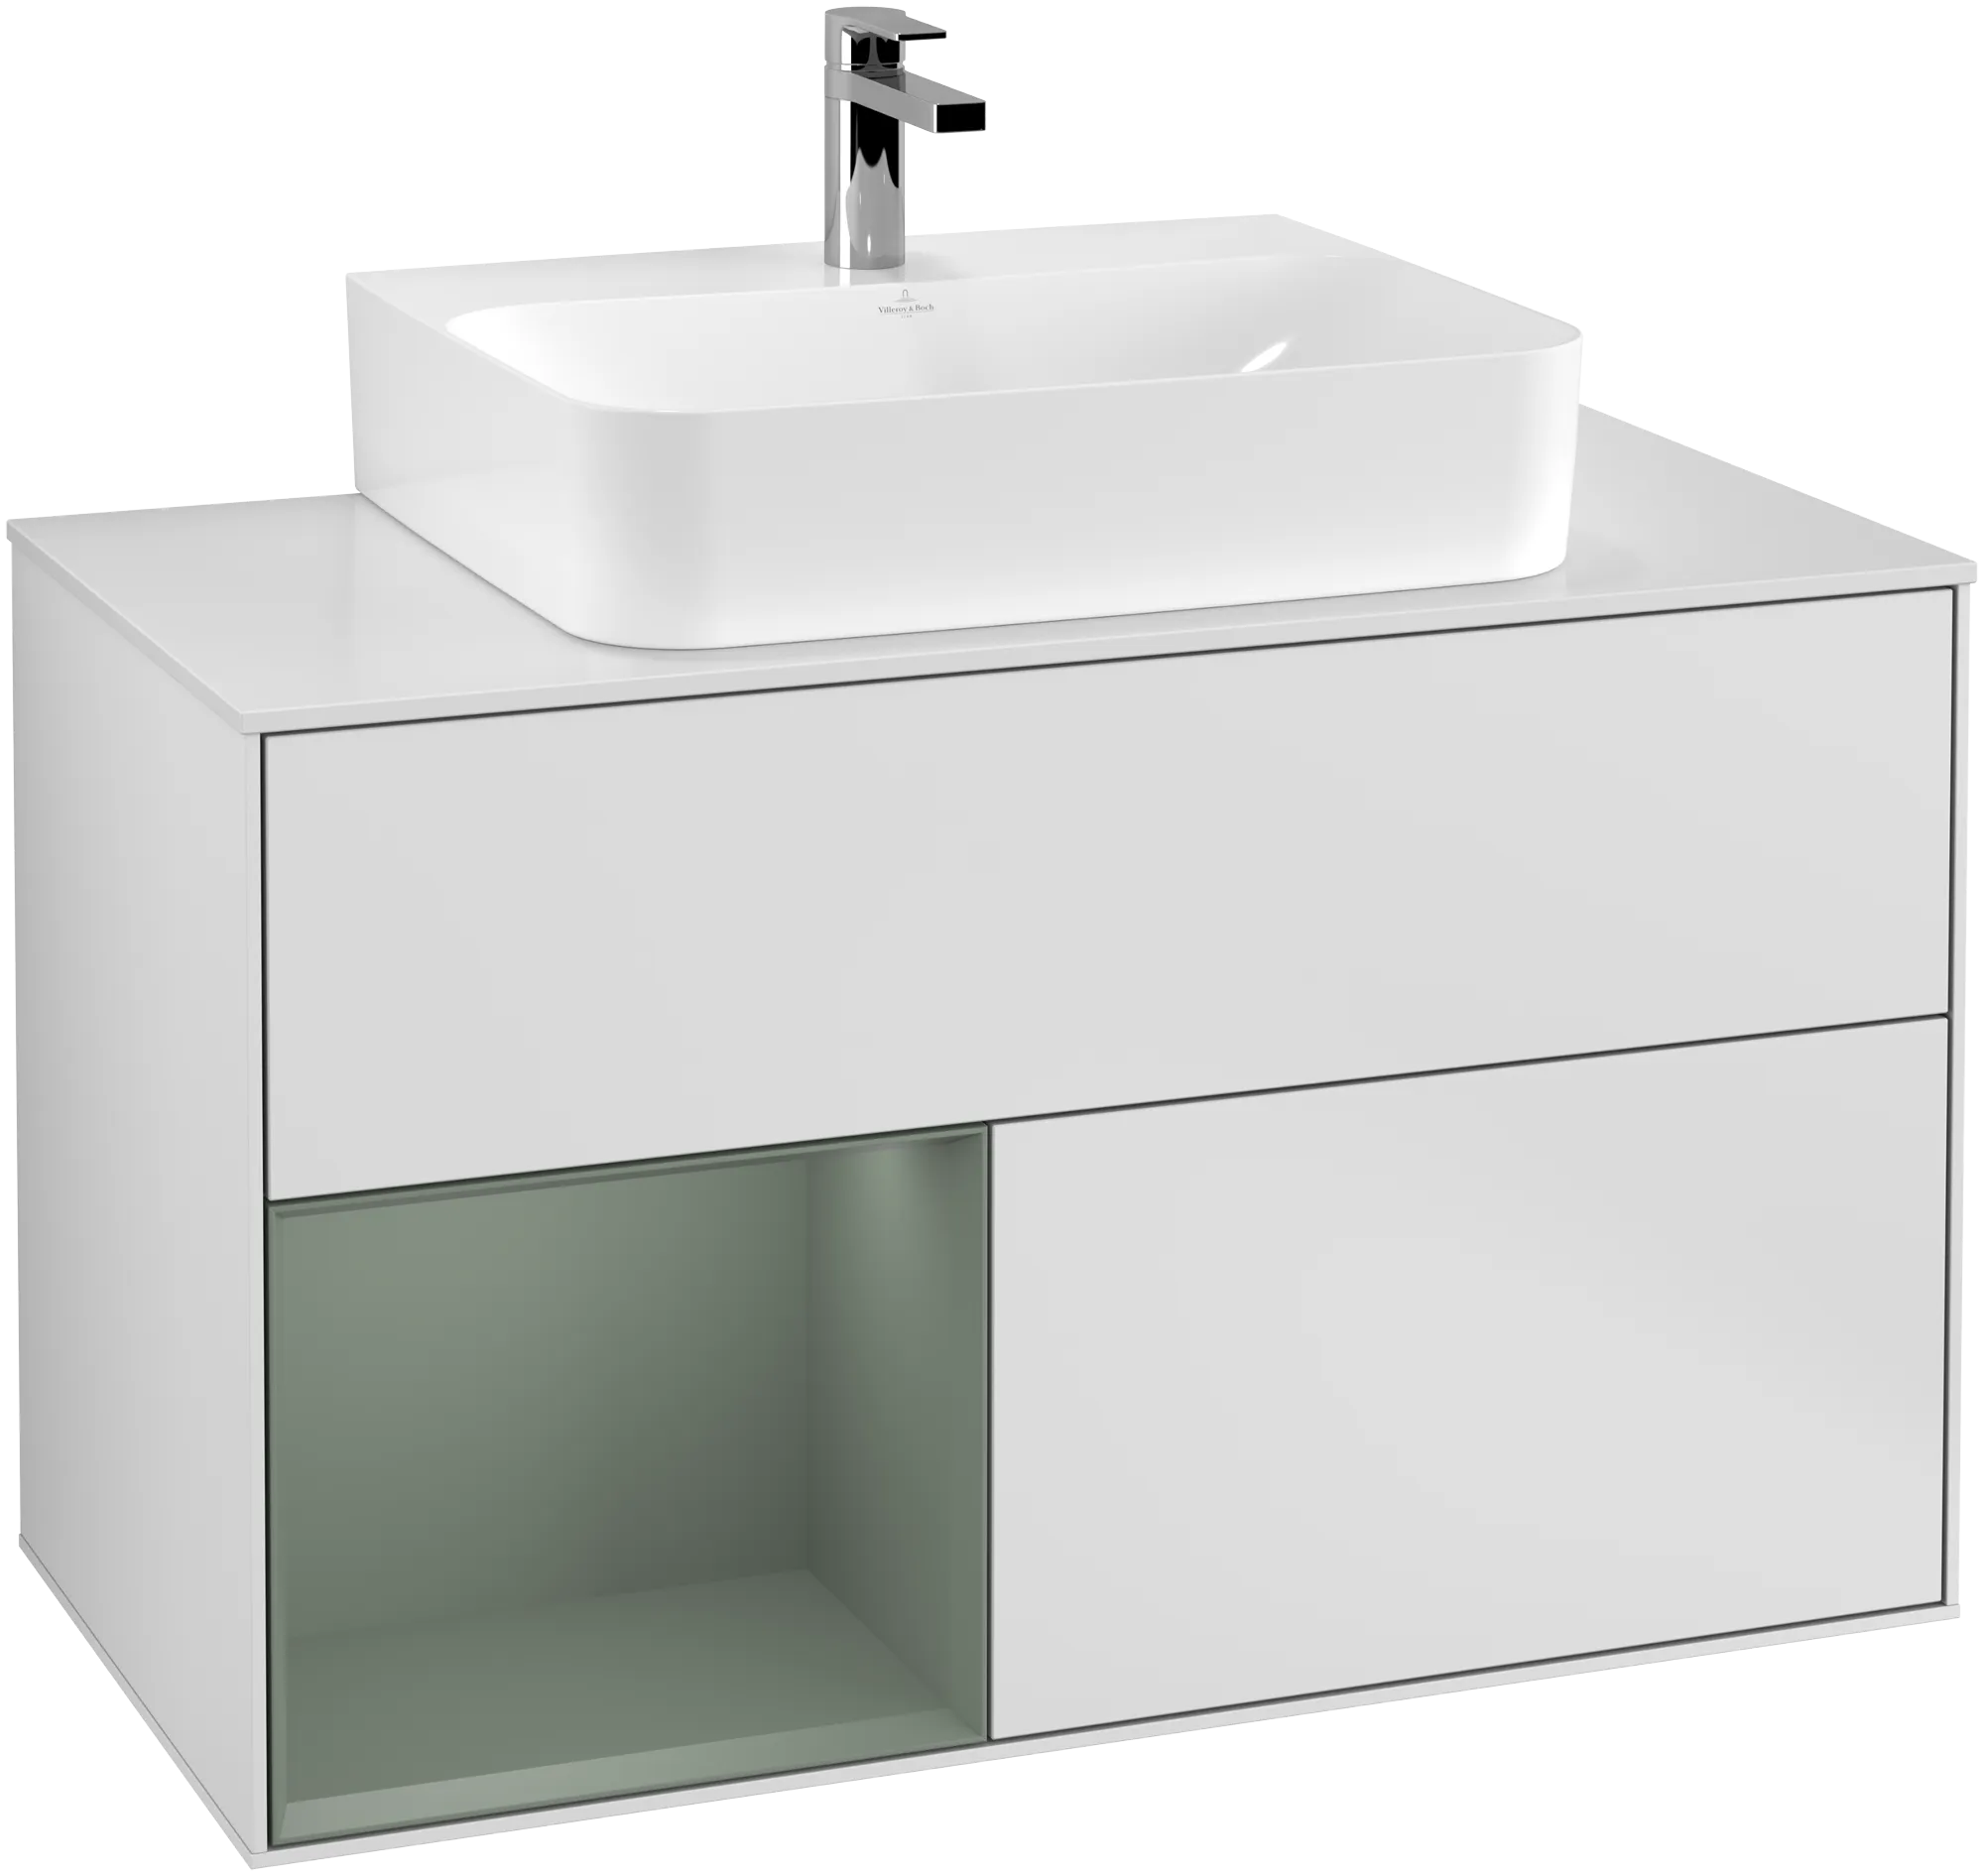 Picture of VILLEROY BOCH Finion Vanity unit, with lighting, 2 pull-out compartments, 1000 x 603 x 501 mm, White Matt Lacquer / Olive Matt Lacquer / Glass White Matt #G111GMMT